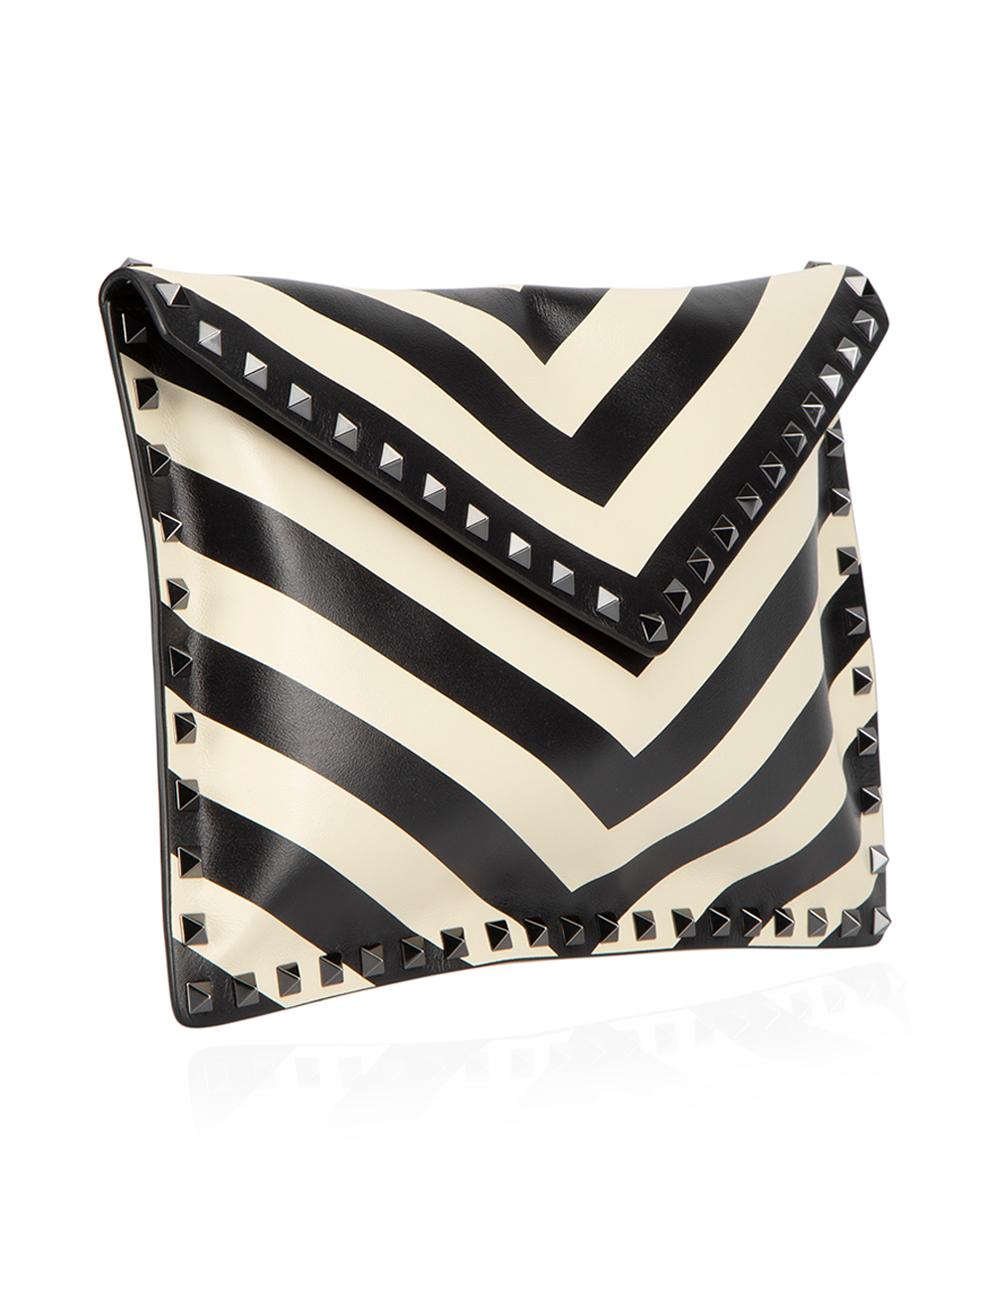 CONDITION is Very good. Hardly any visible wear to clutch is evident on this used Valentino designer resale item. This bag comes with original dust bag.



Details


Black & white

Leather

Medium envelope clutch bag

Chevron print

Studded